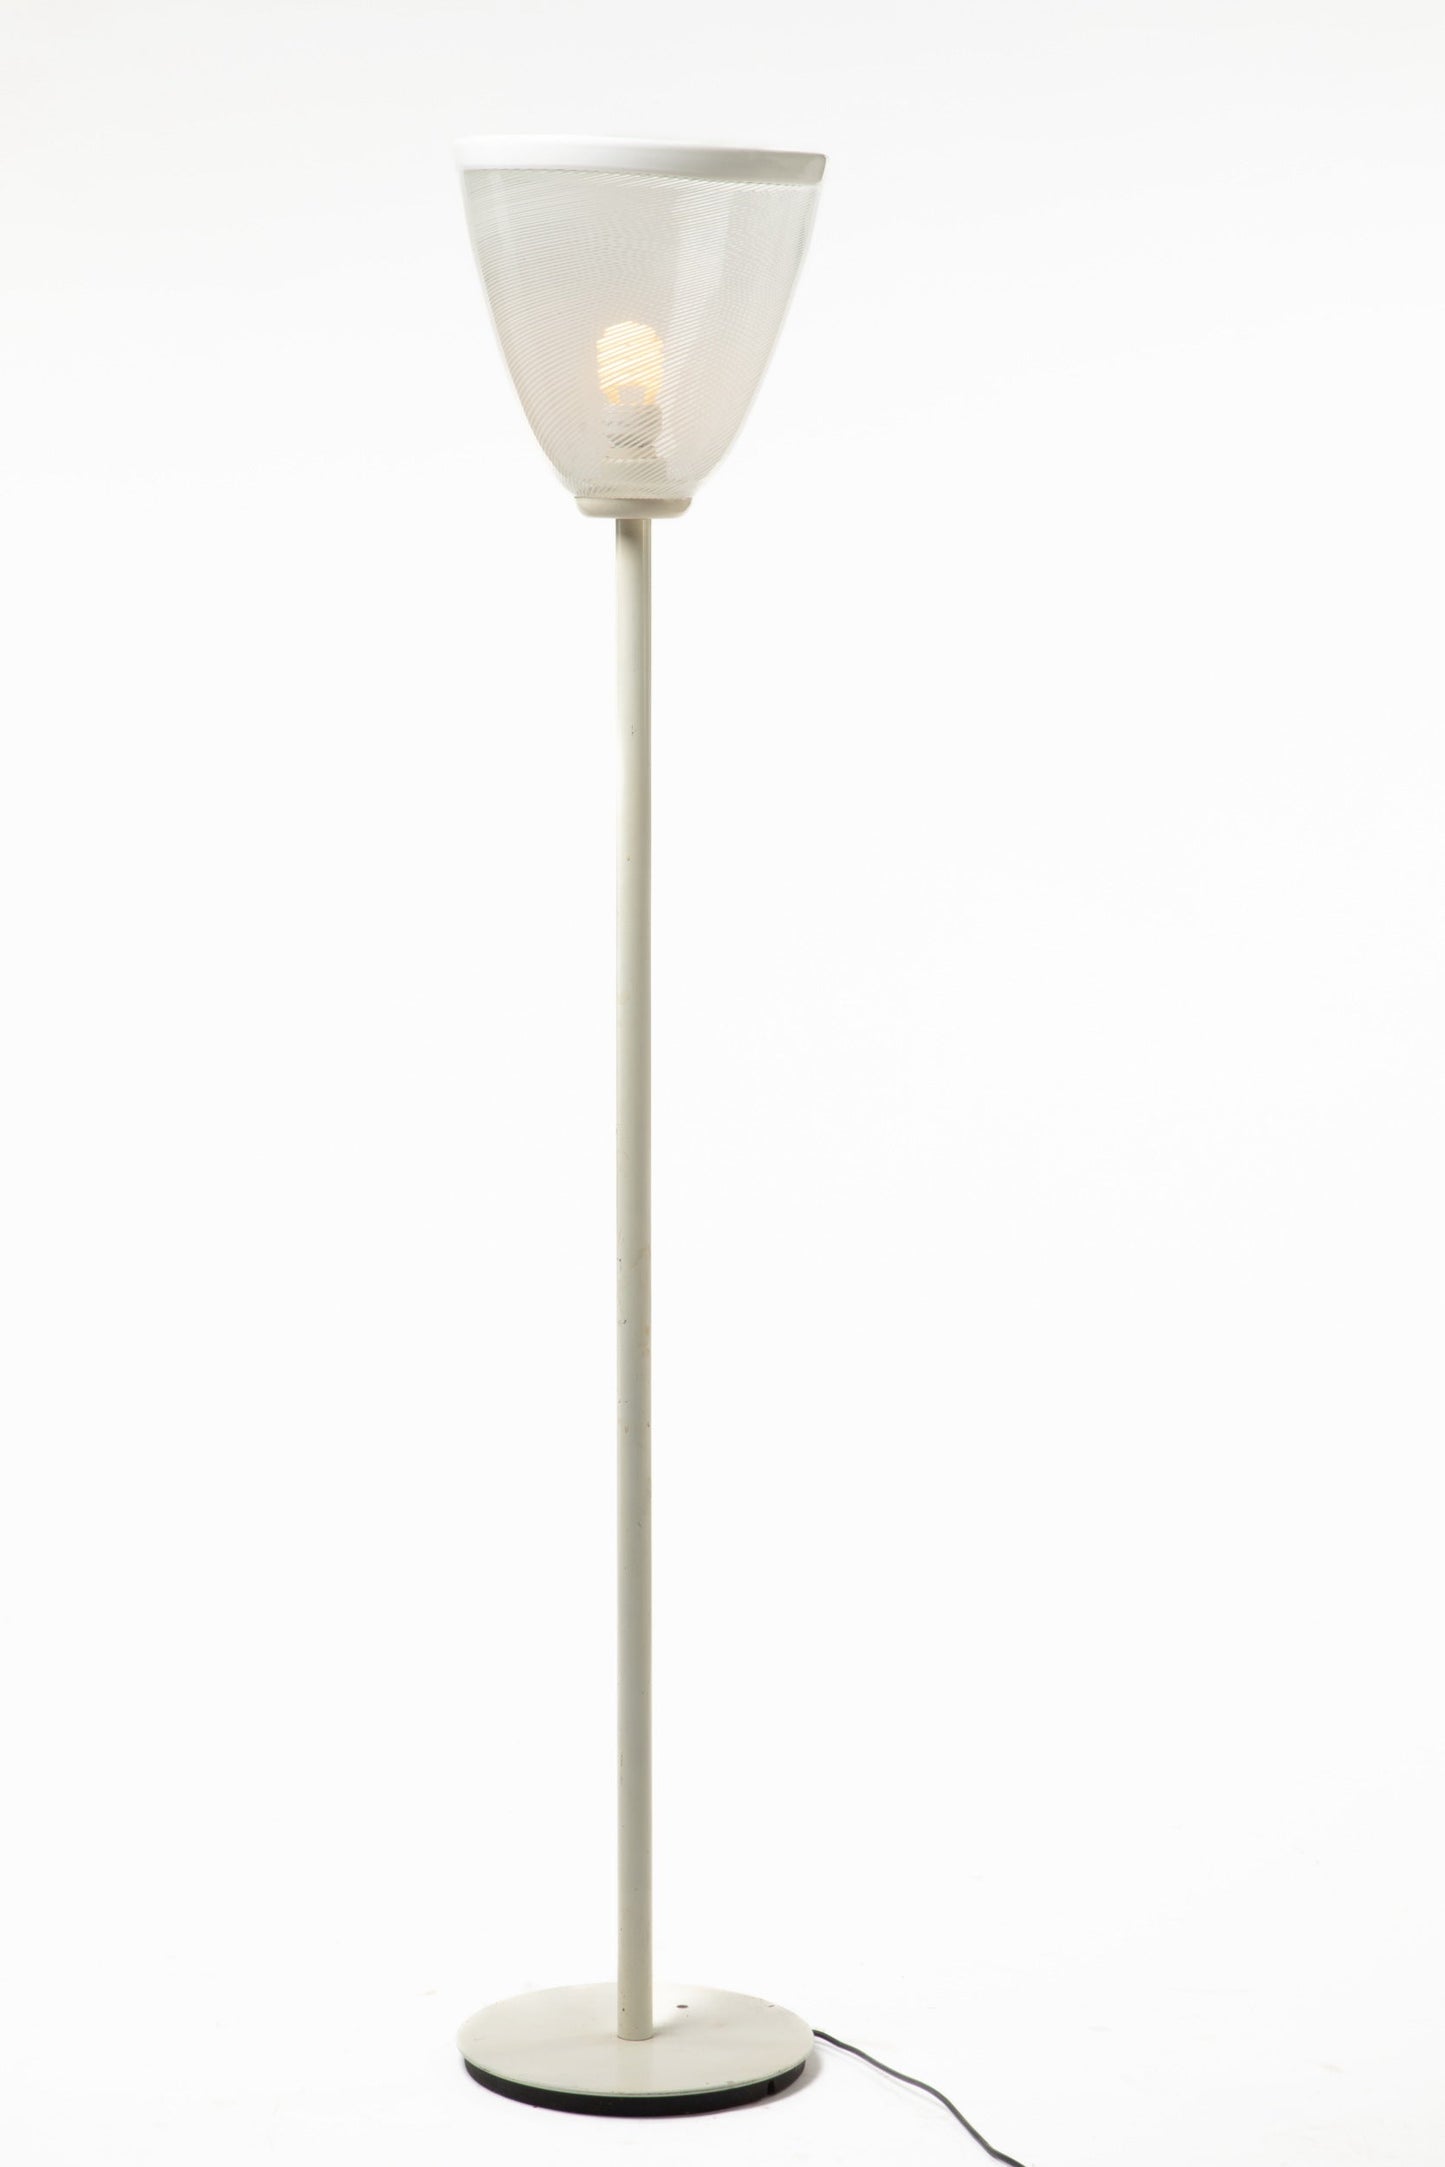 Reticello glass floor lamp from the 80s